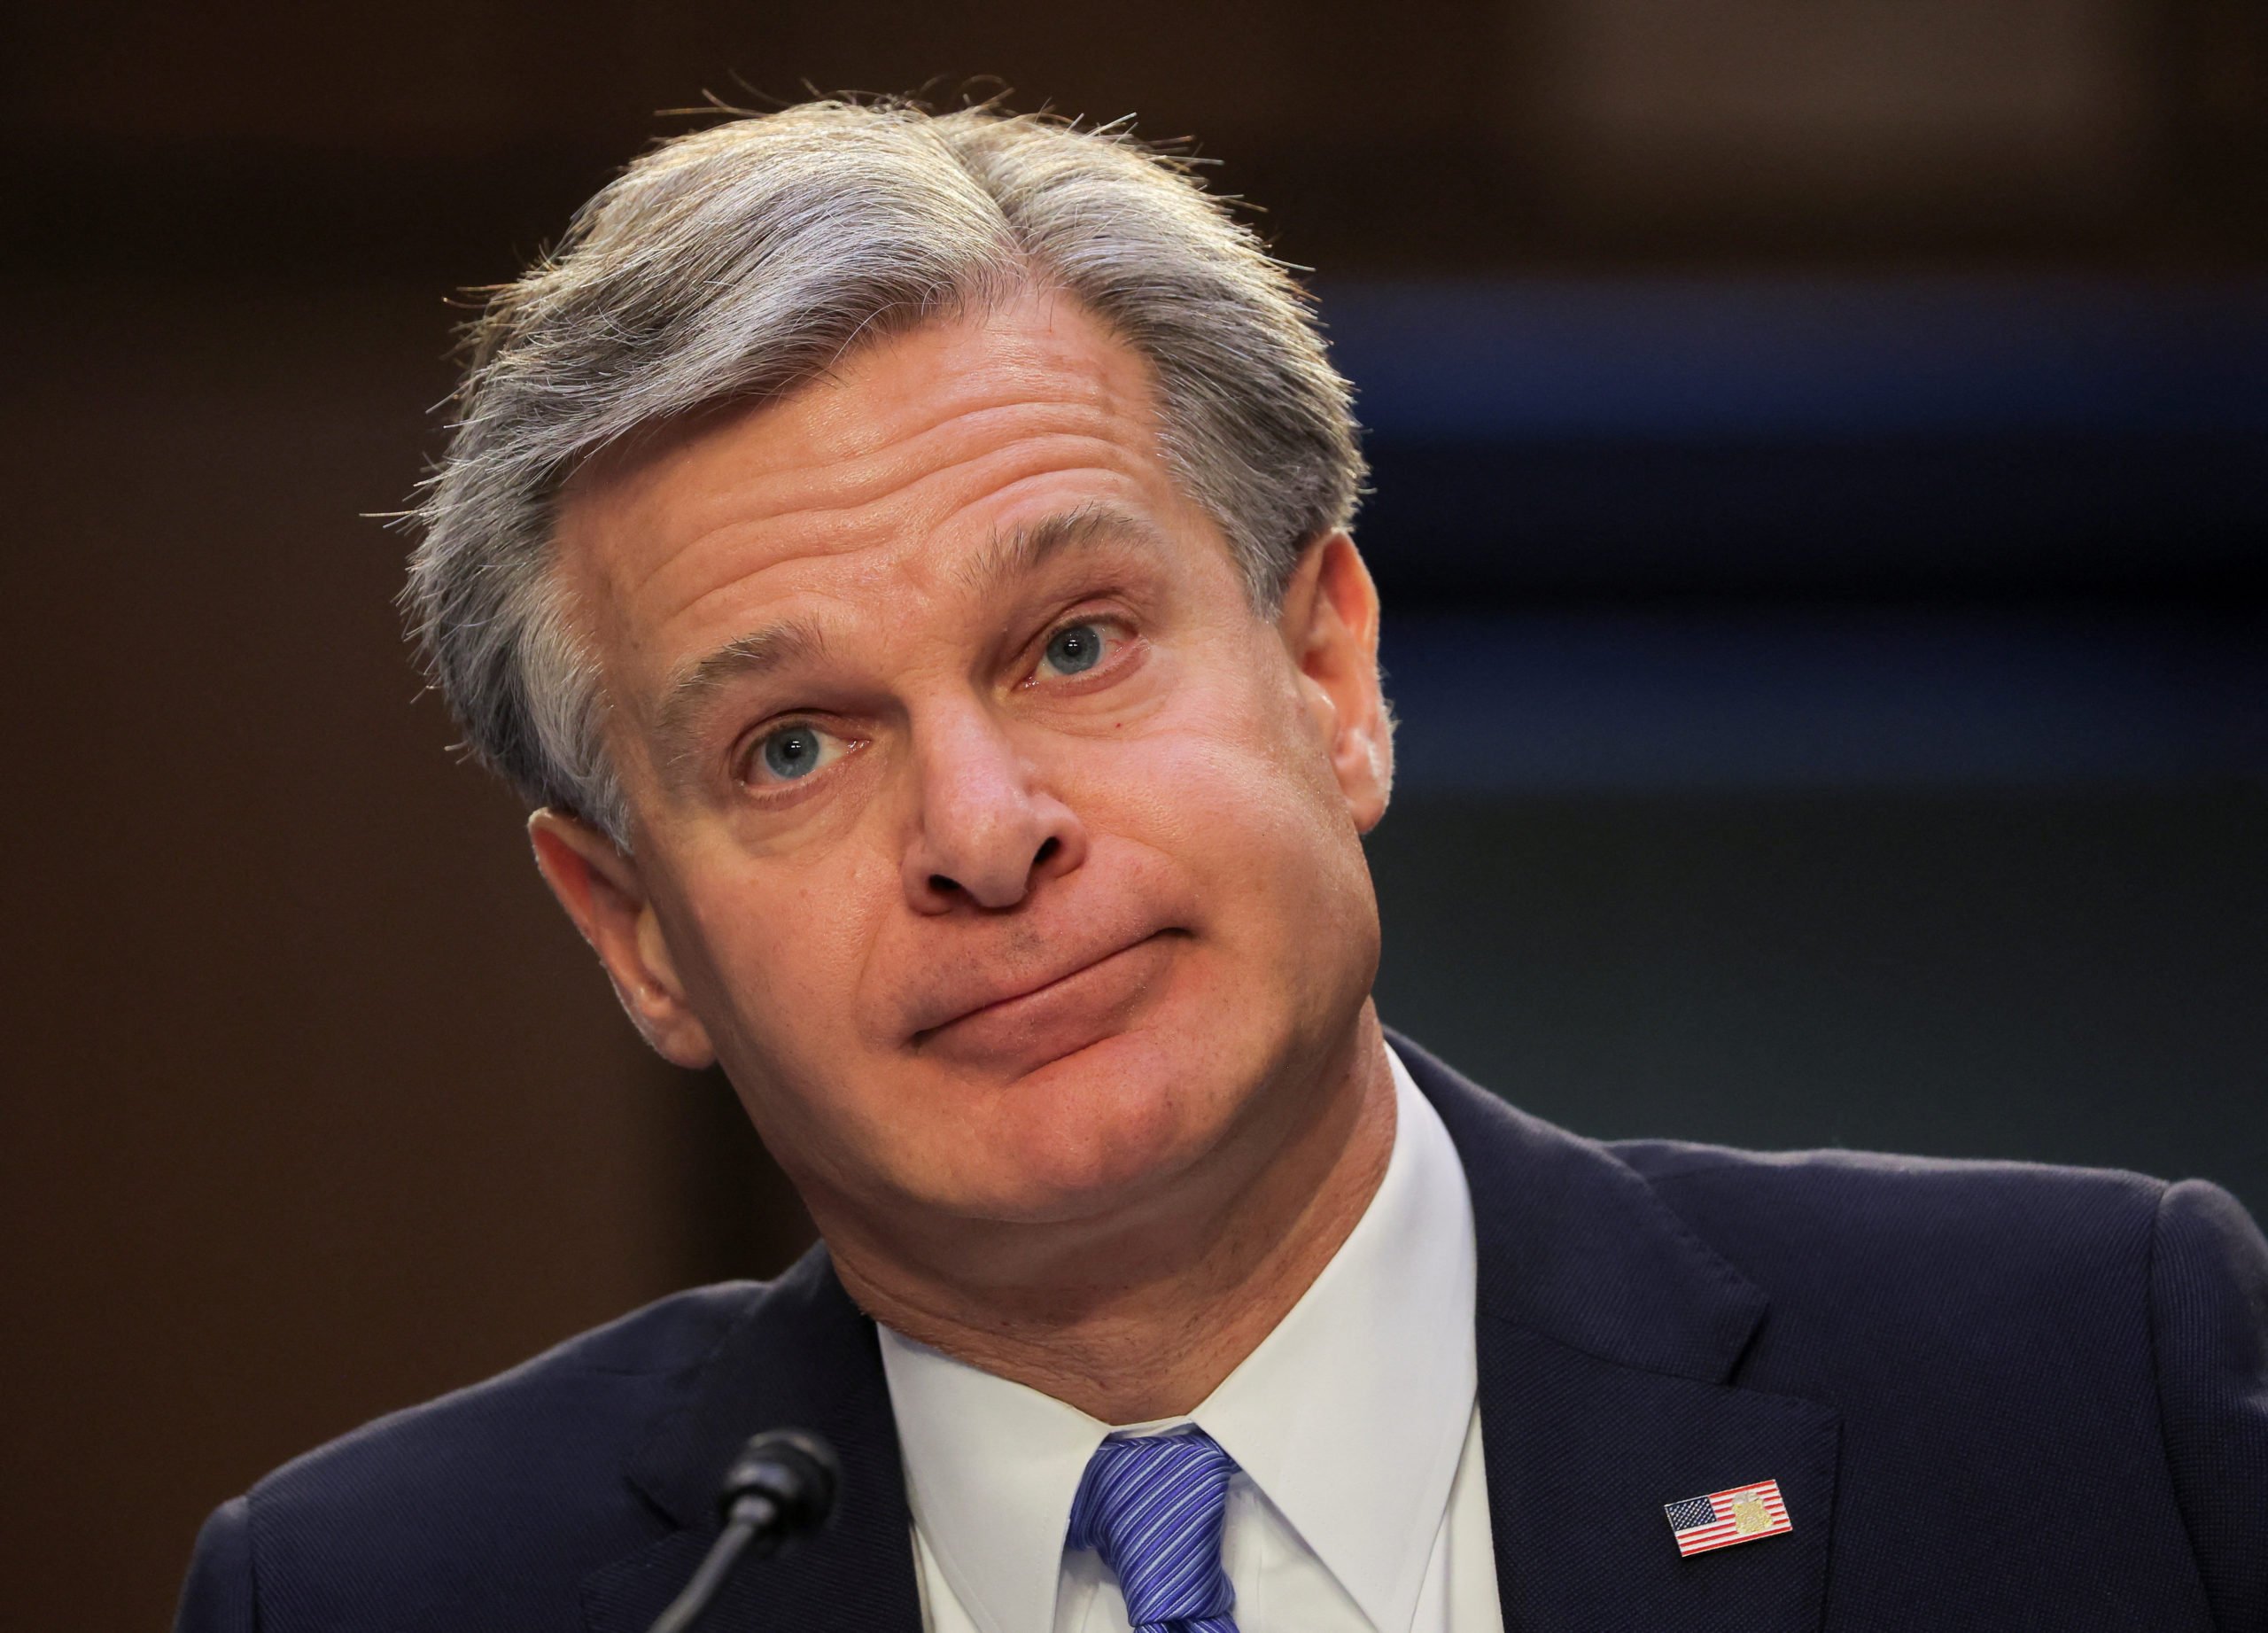 FBI Director Christopher Wray testifies before a Senate Judiciary Committee hearing entitled "Oversight of the Federal Bureau of Investigation," on Capitol Hill in Washington, U.S. August 4, 2022. REUTERS/Jim Bourg